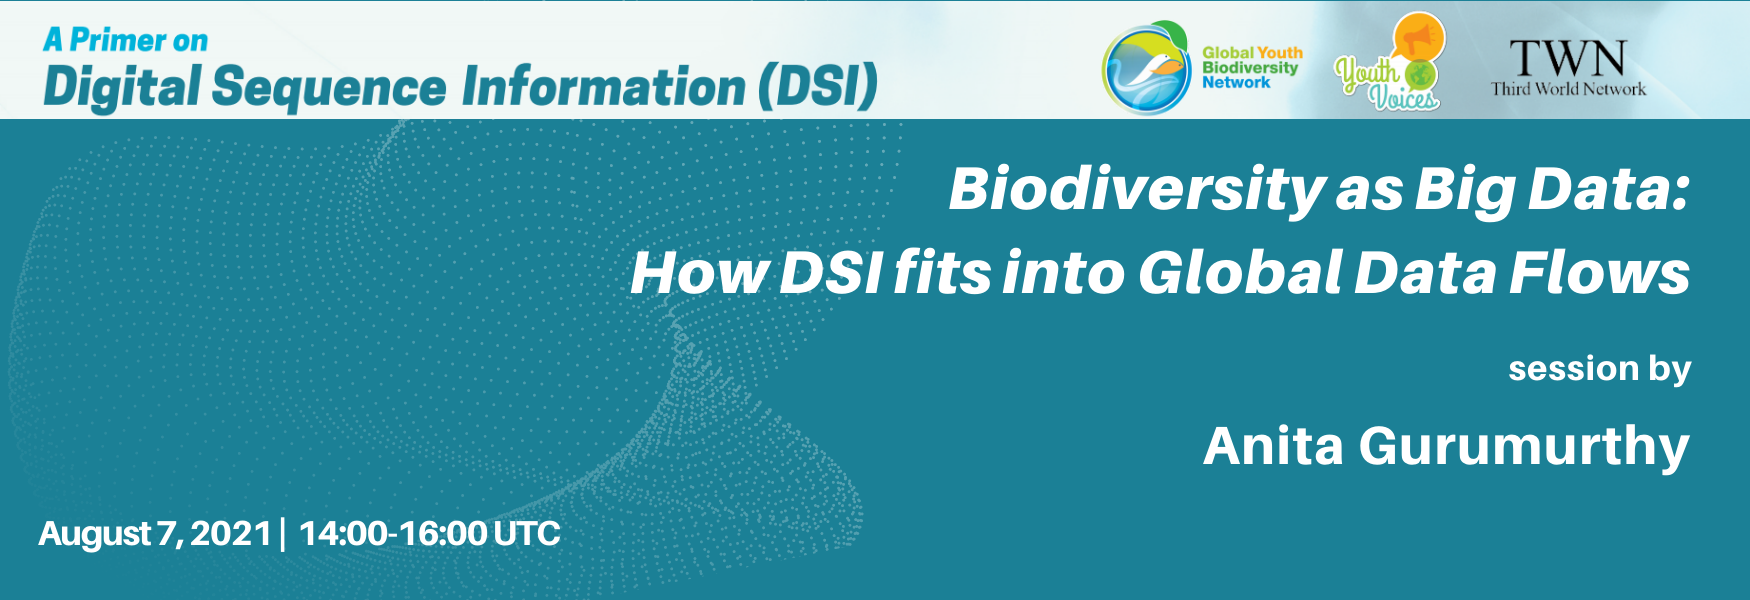 Biodiversity as Big Data: How DSI fits into Global Data Flows